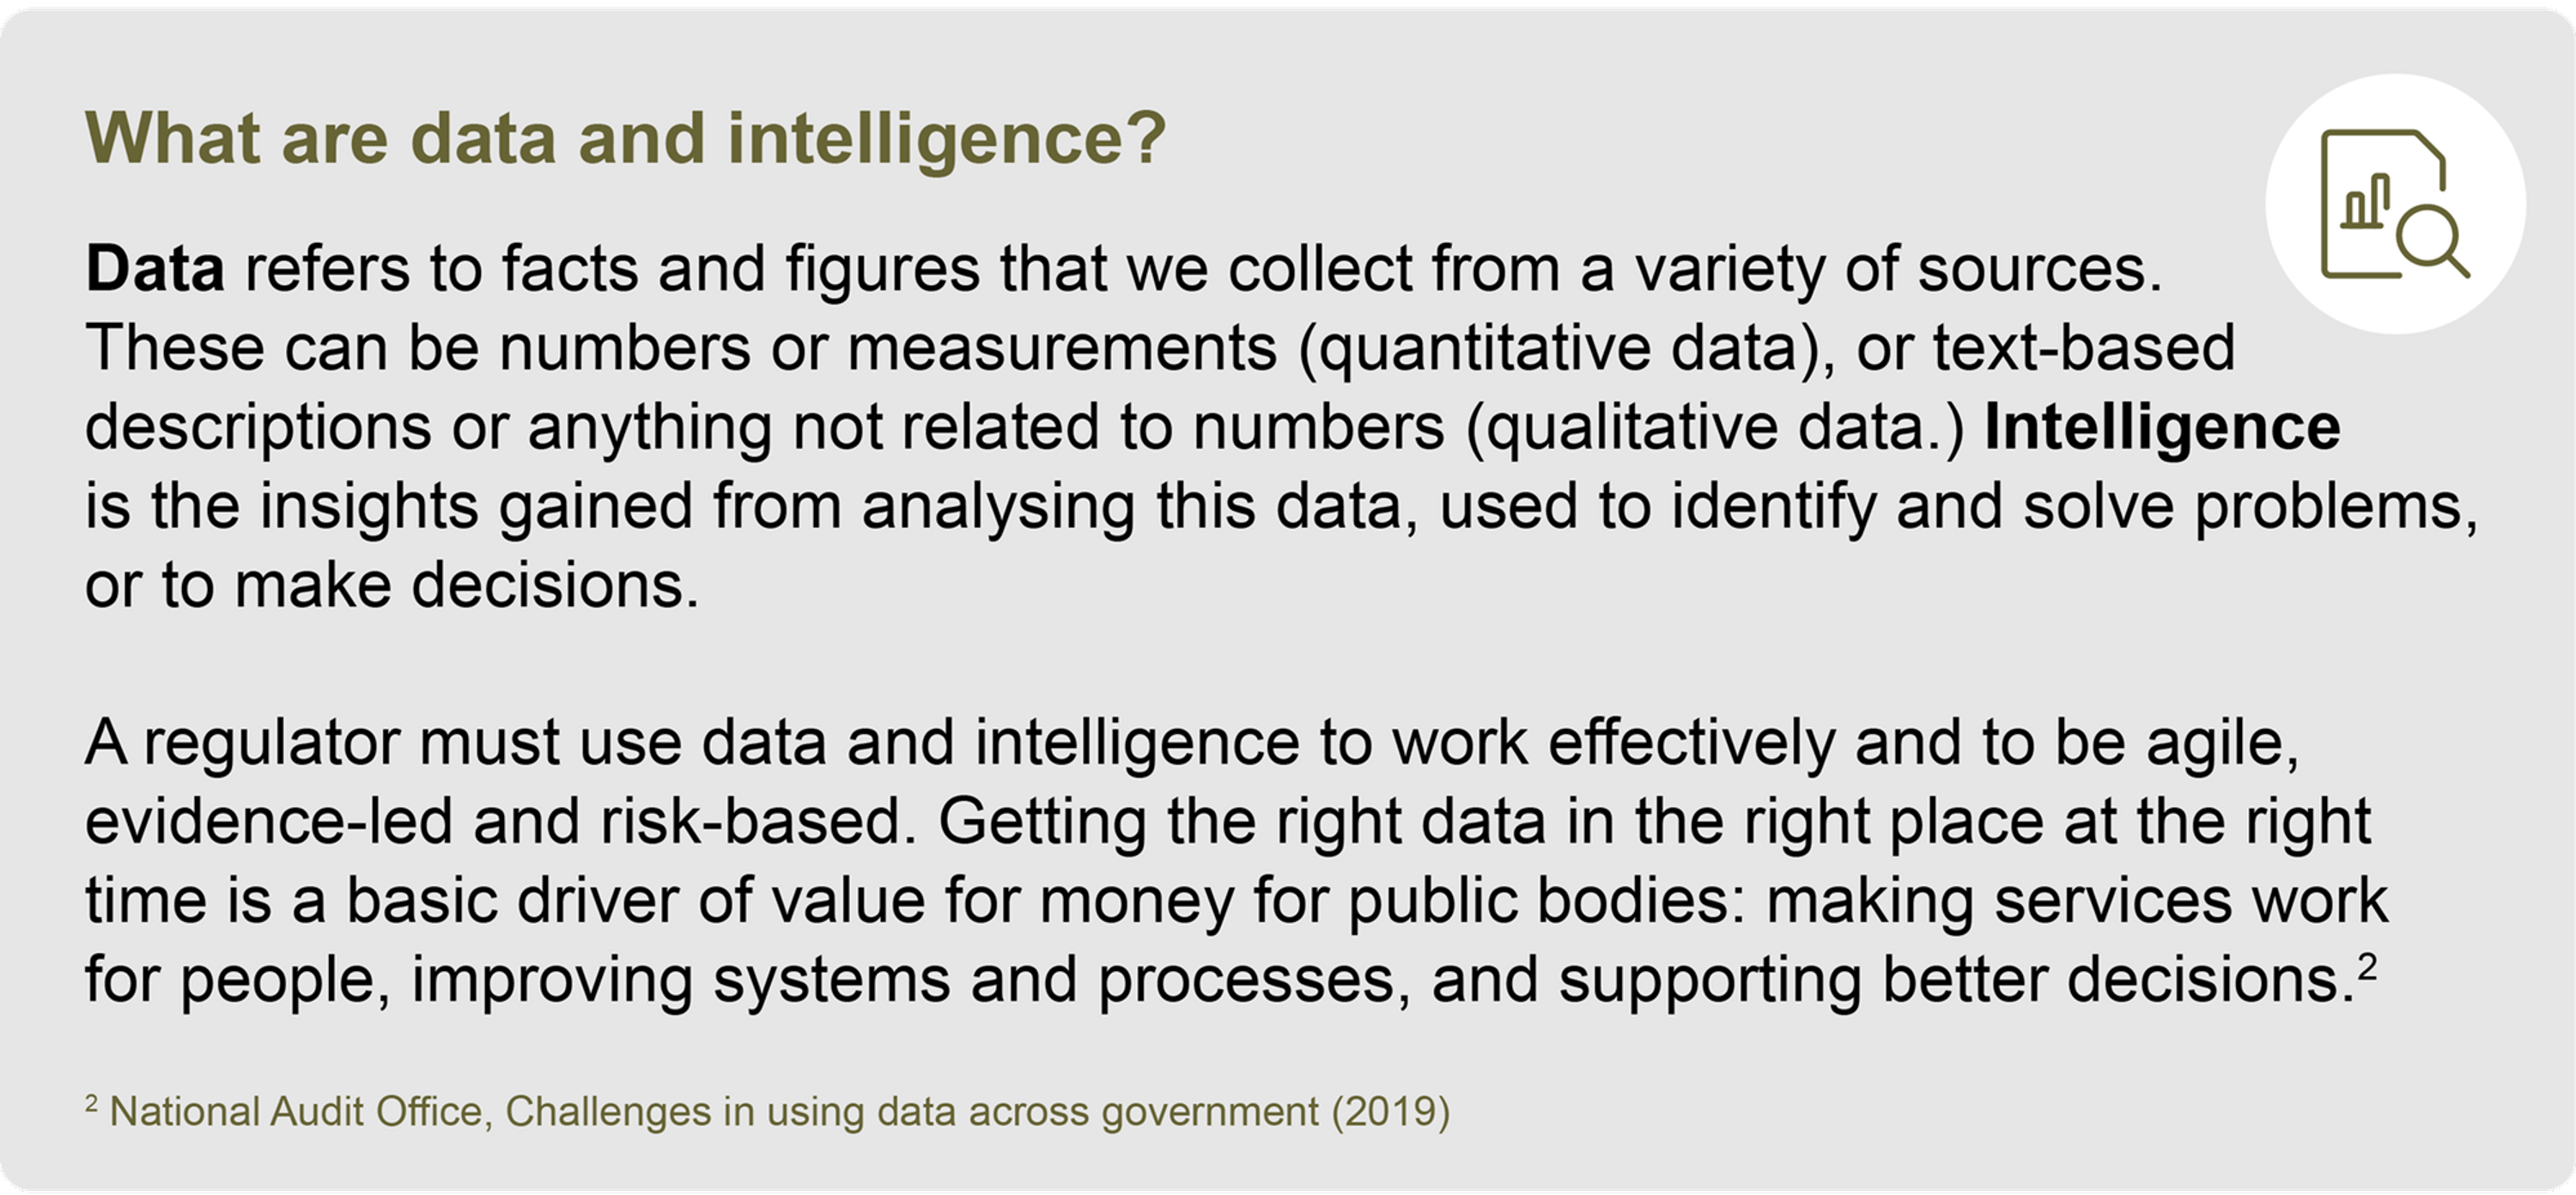 What are data and intelligence?